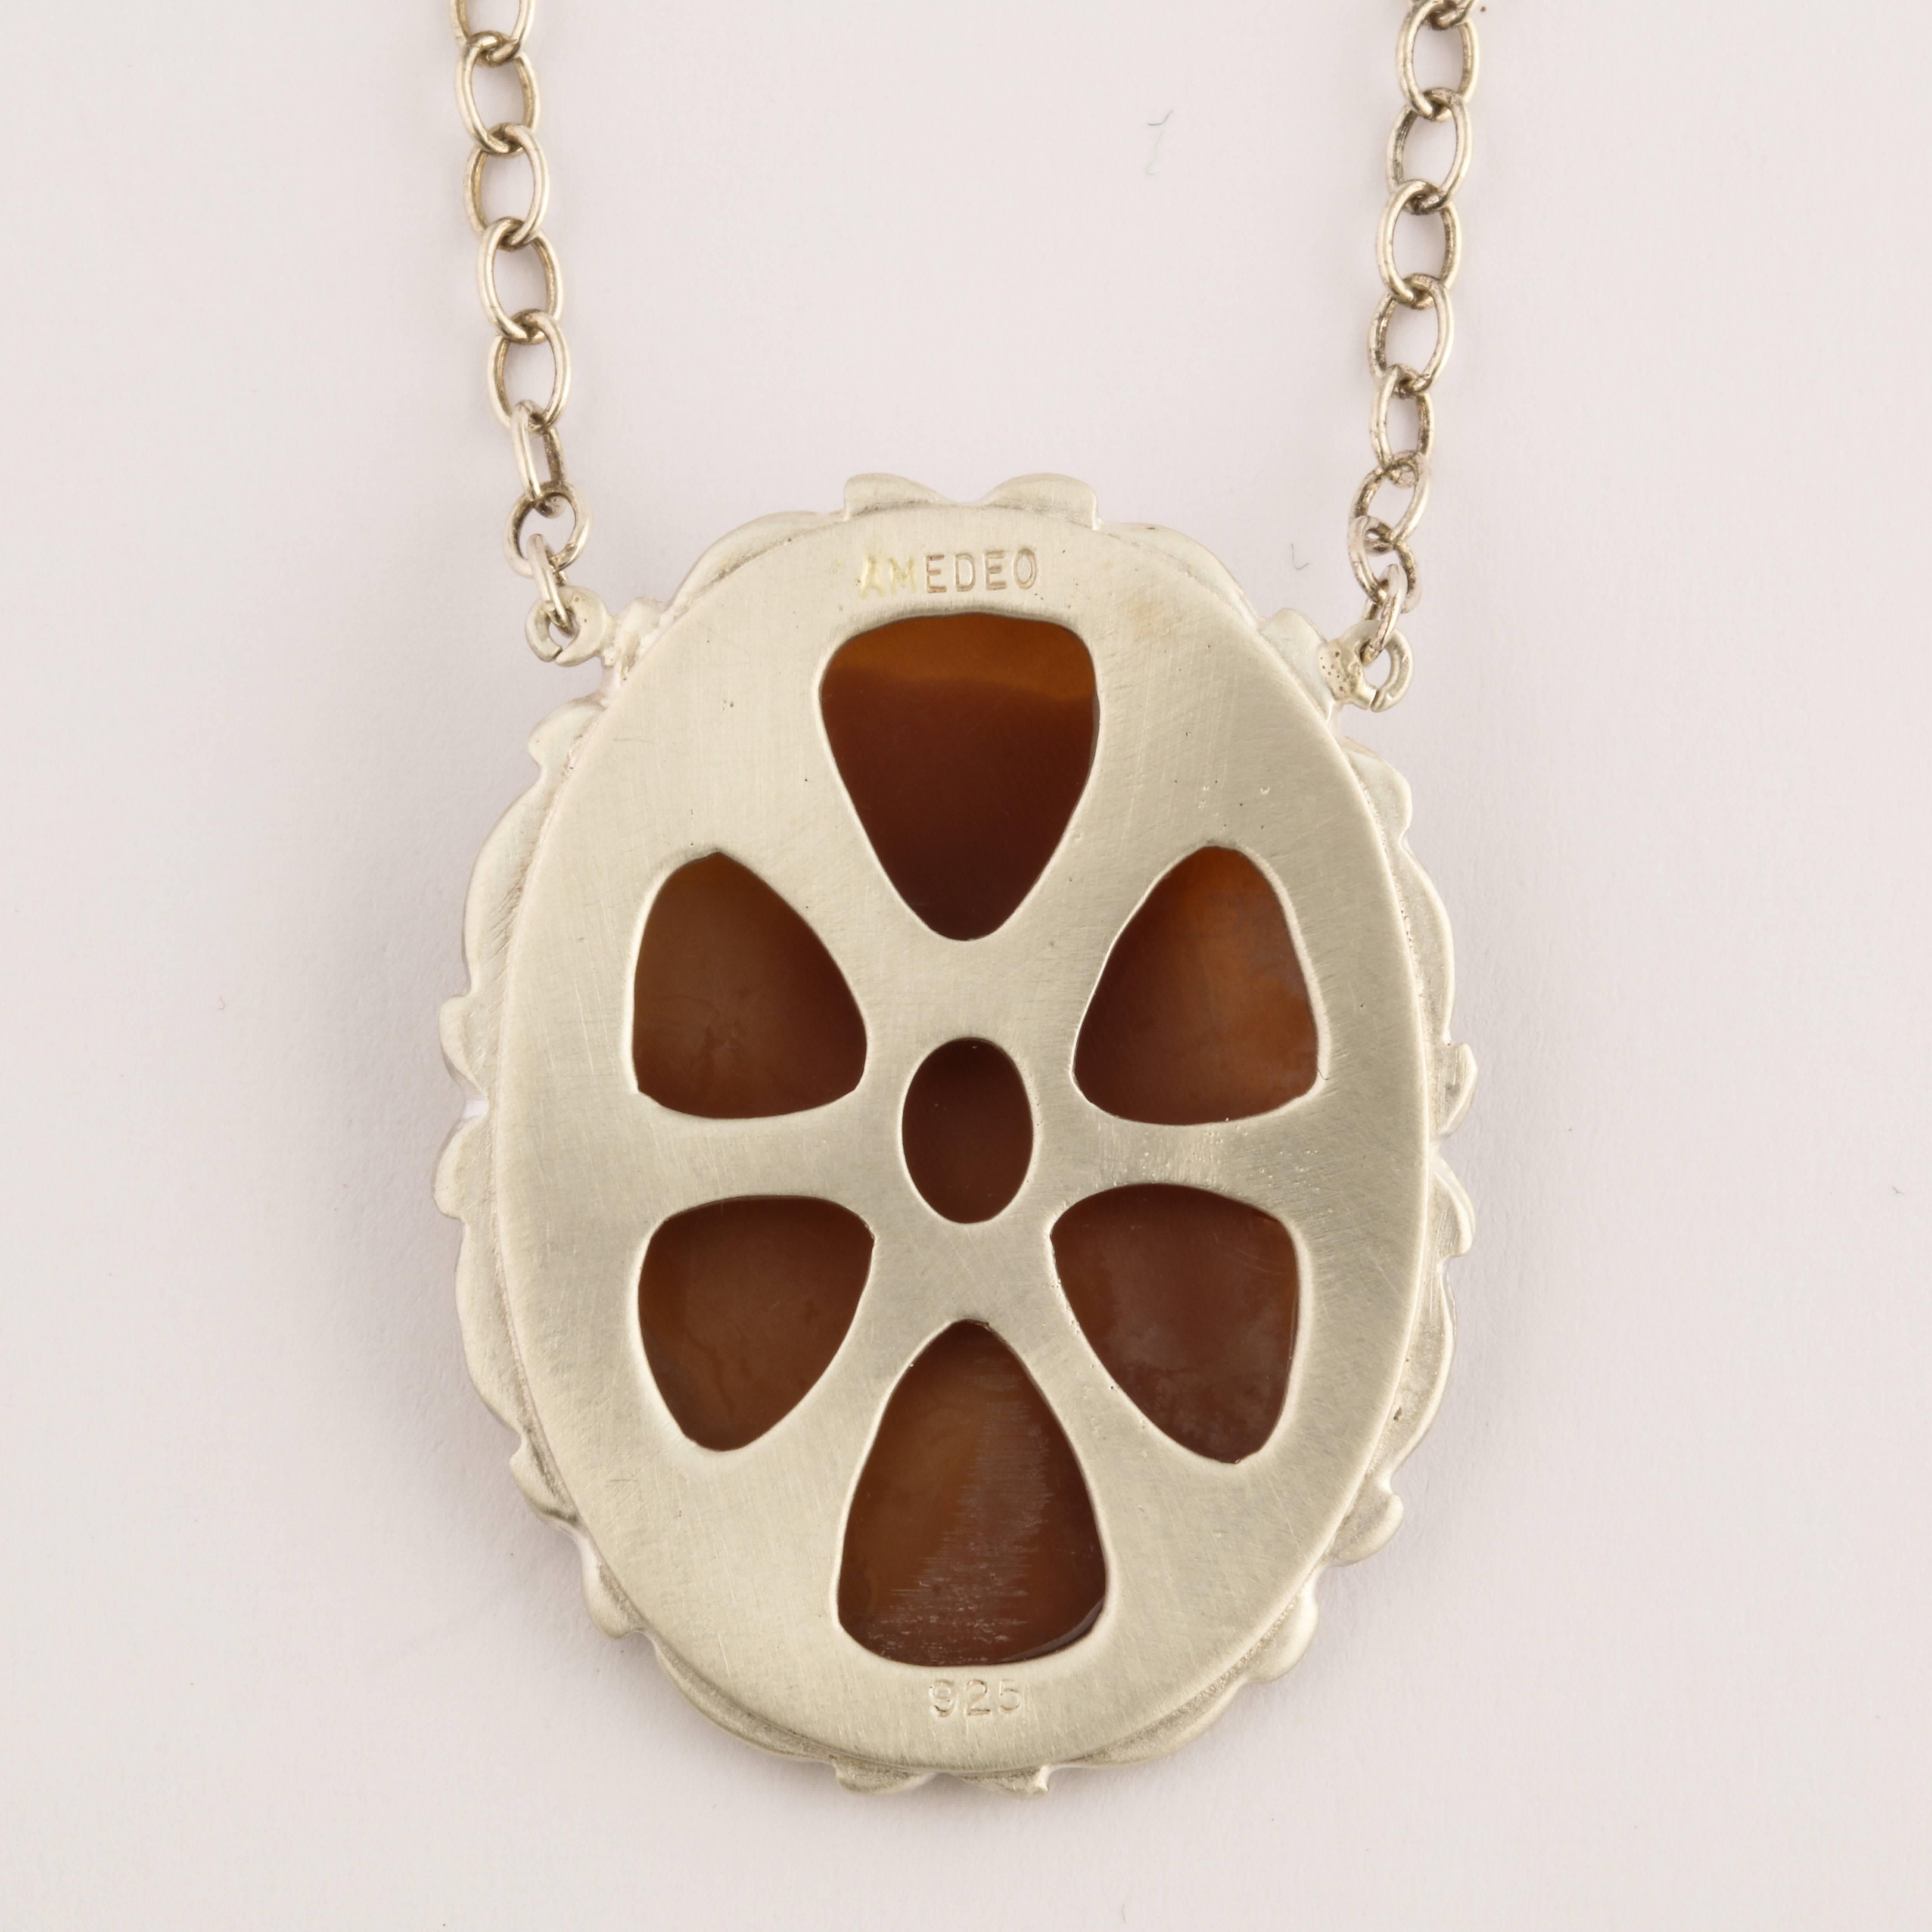 Amedeo La Rana Cameo Necklace In New Condition For Sale In New York, NY